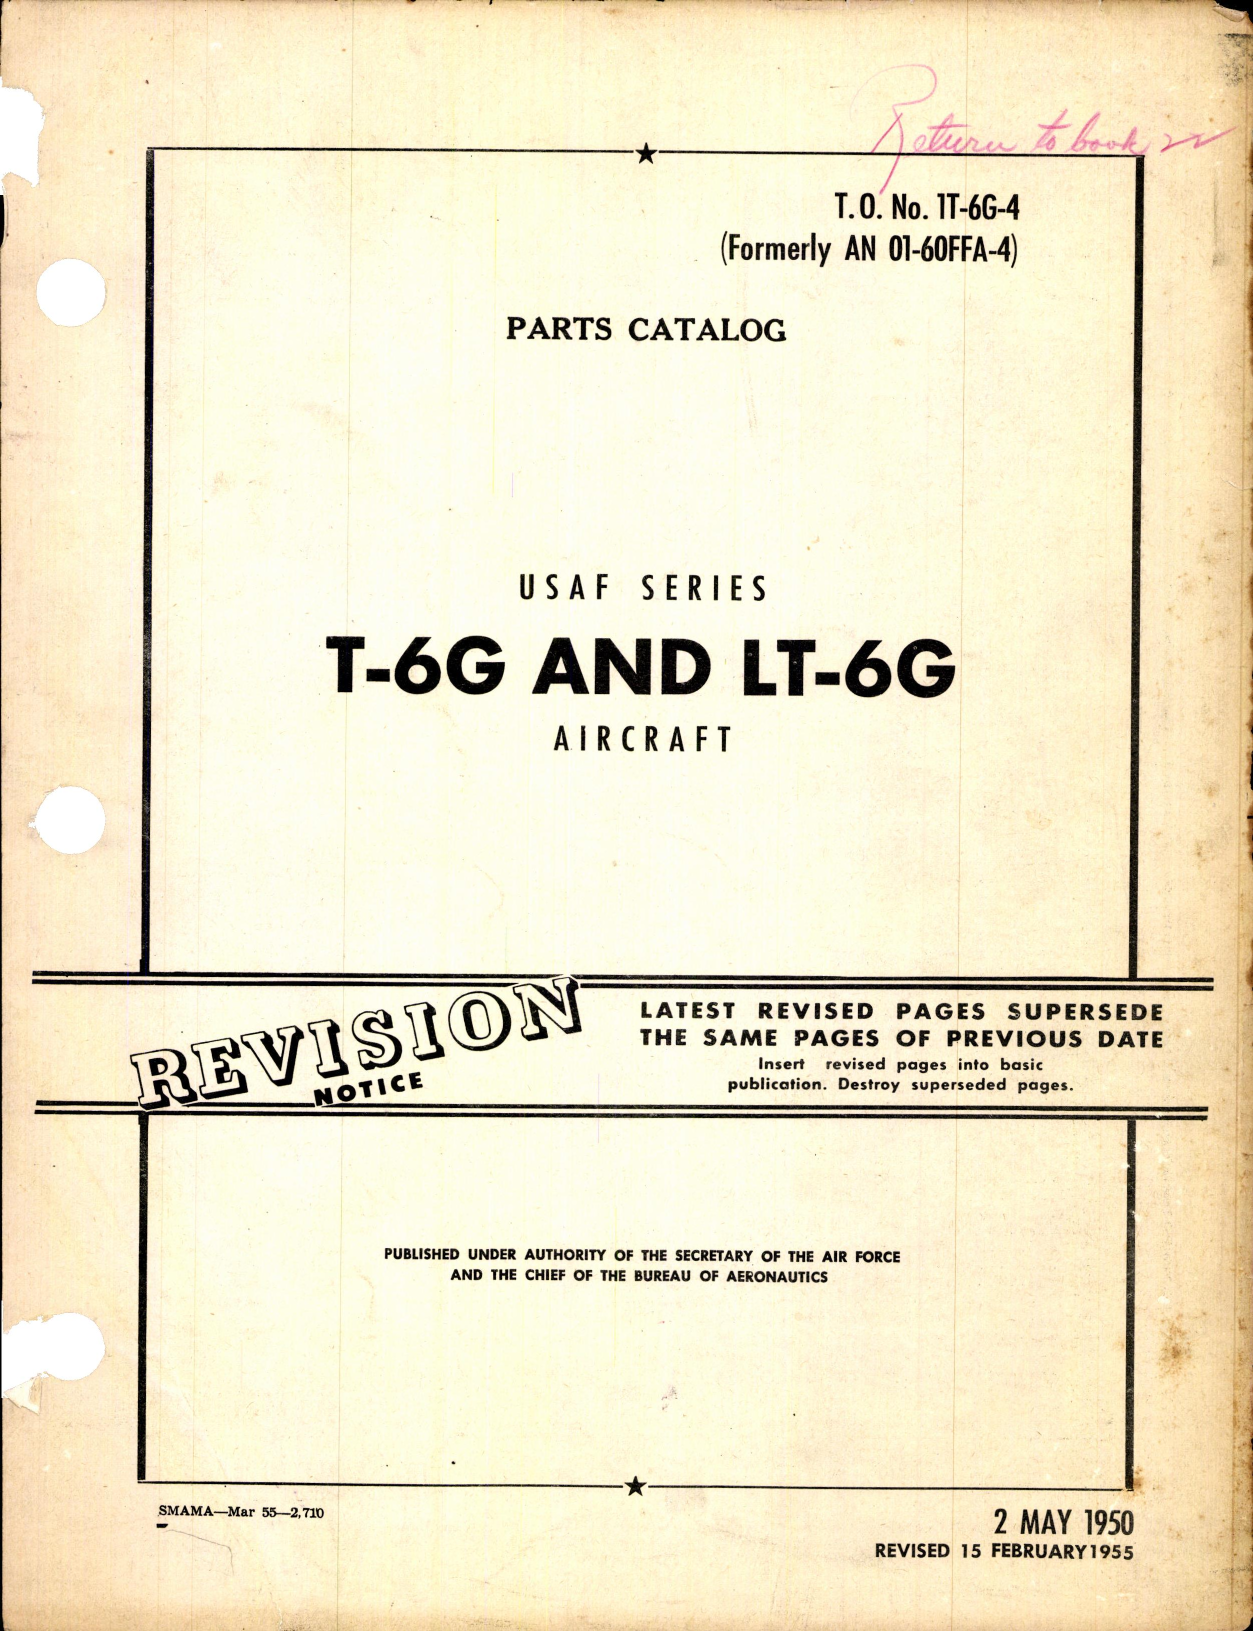 Sample page 1 from AirCorps Library document: Parts Catalog for T-6G and LT-6G Aircraft